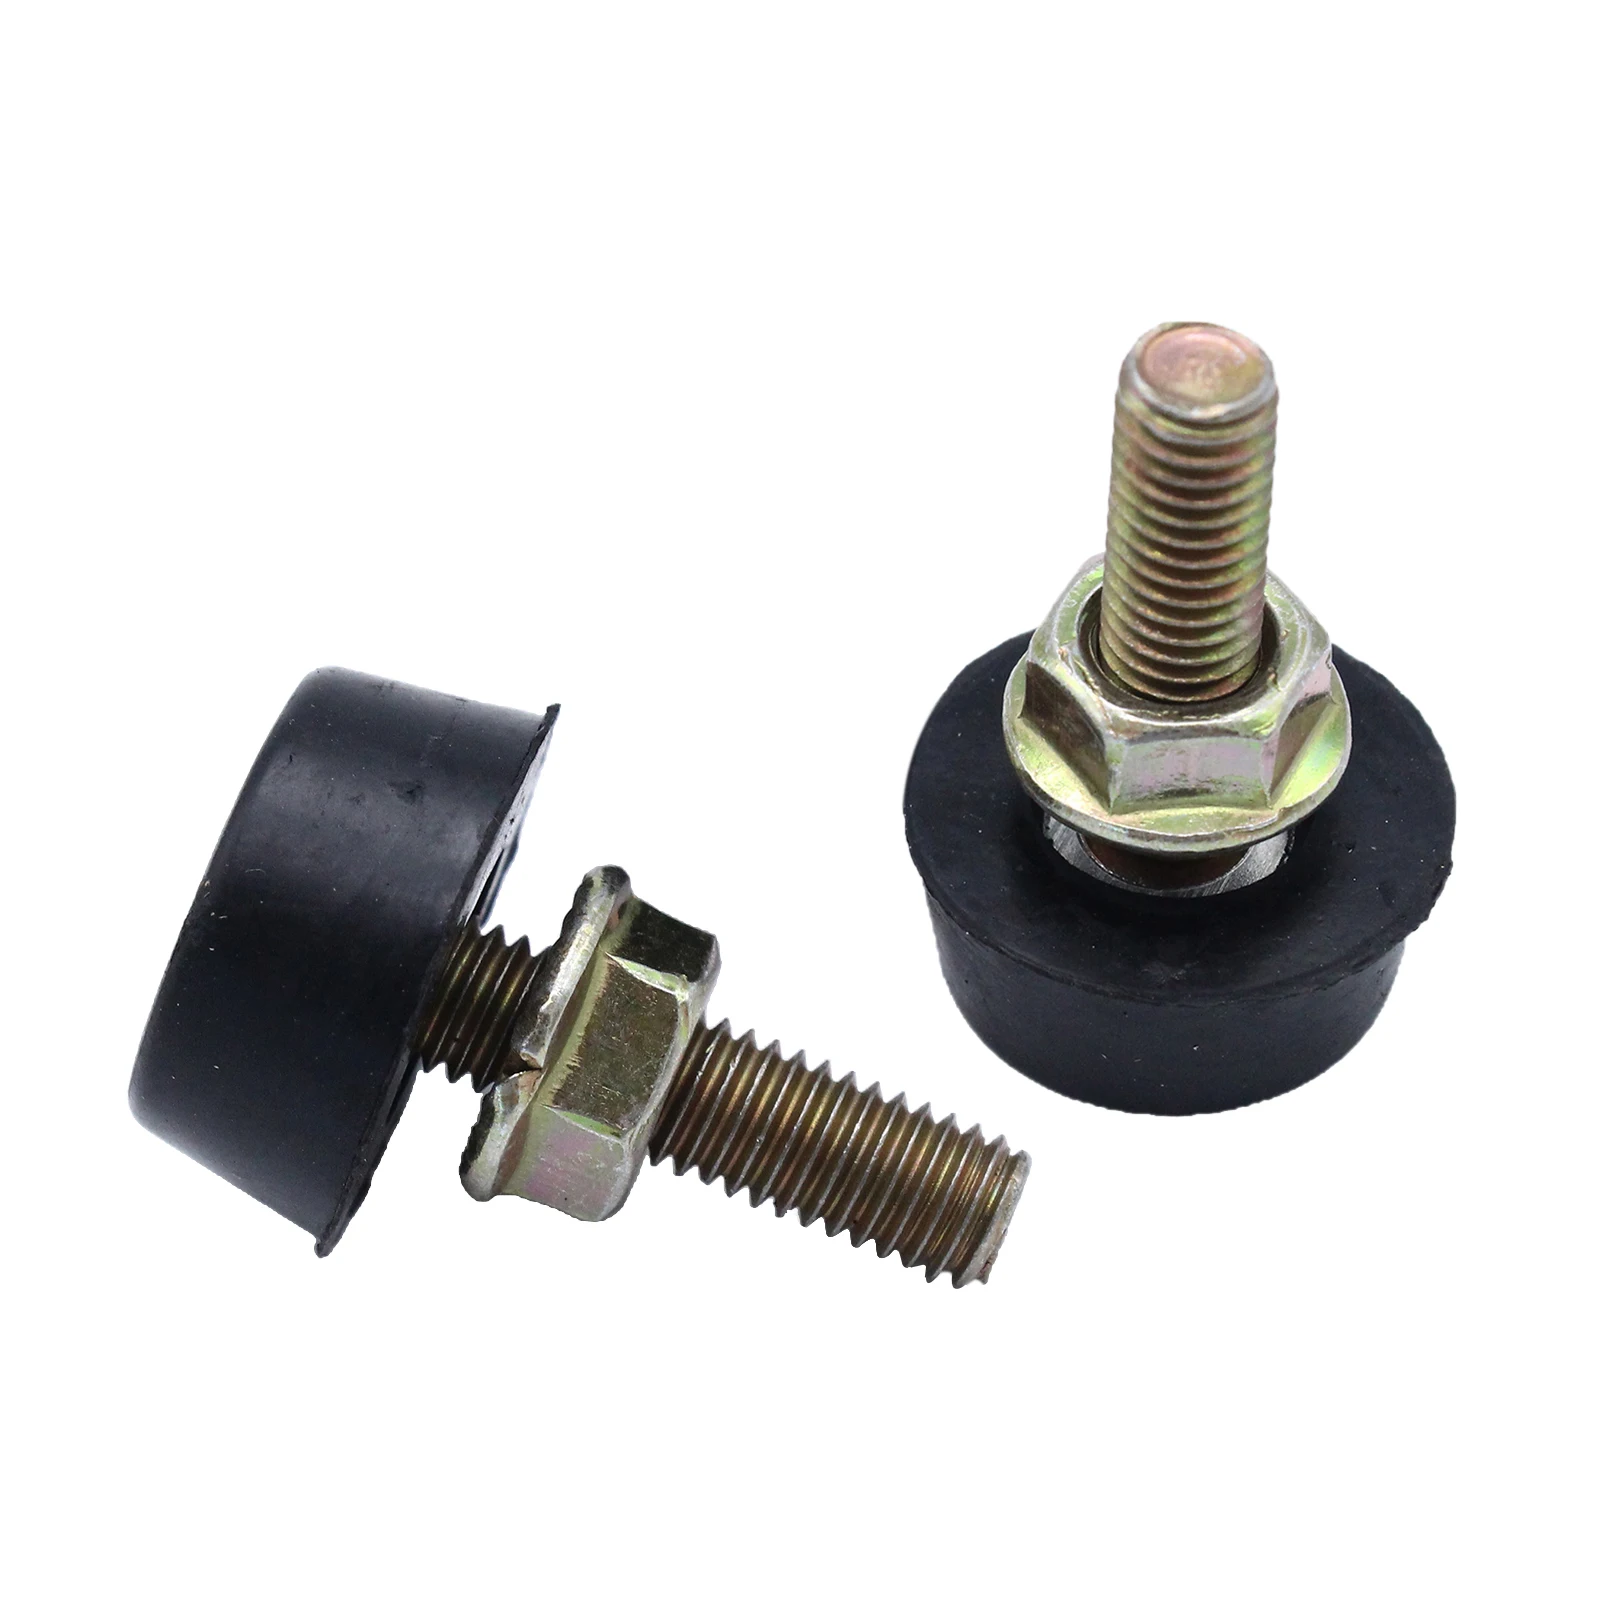 2 Pieces Bonnet Stop Adjuster fits for Ford Maverick 62840-H8500 BSANS1GP-1 ,Easy to Install, Professional Accessories